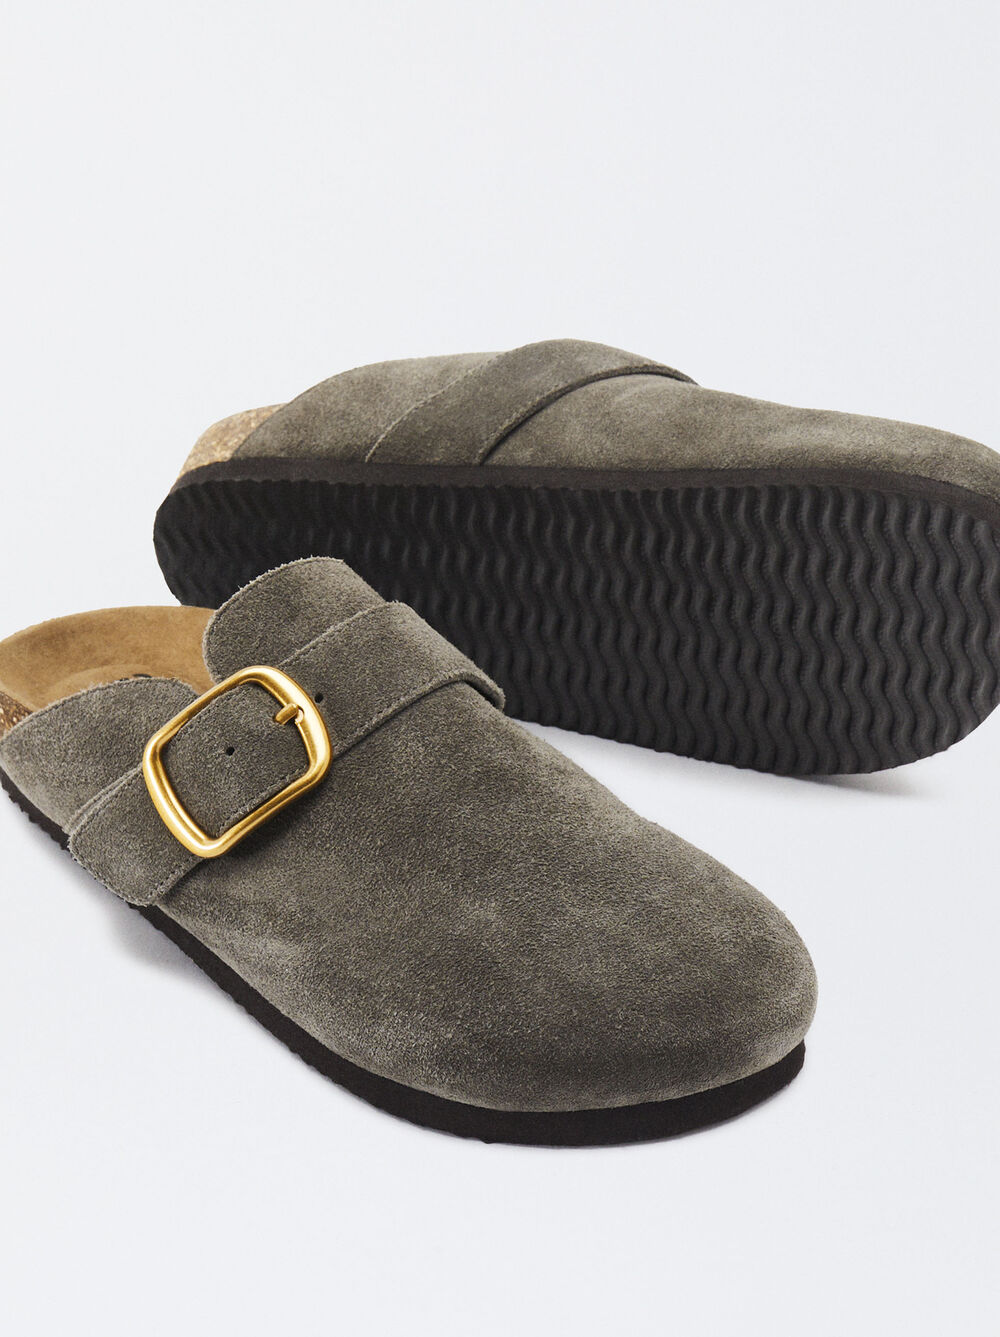 Leather Clogs With Buckles